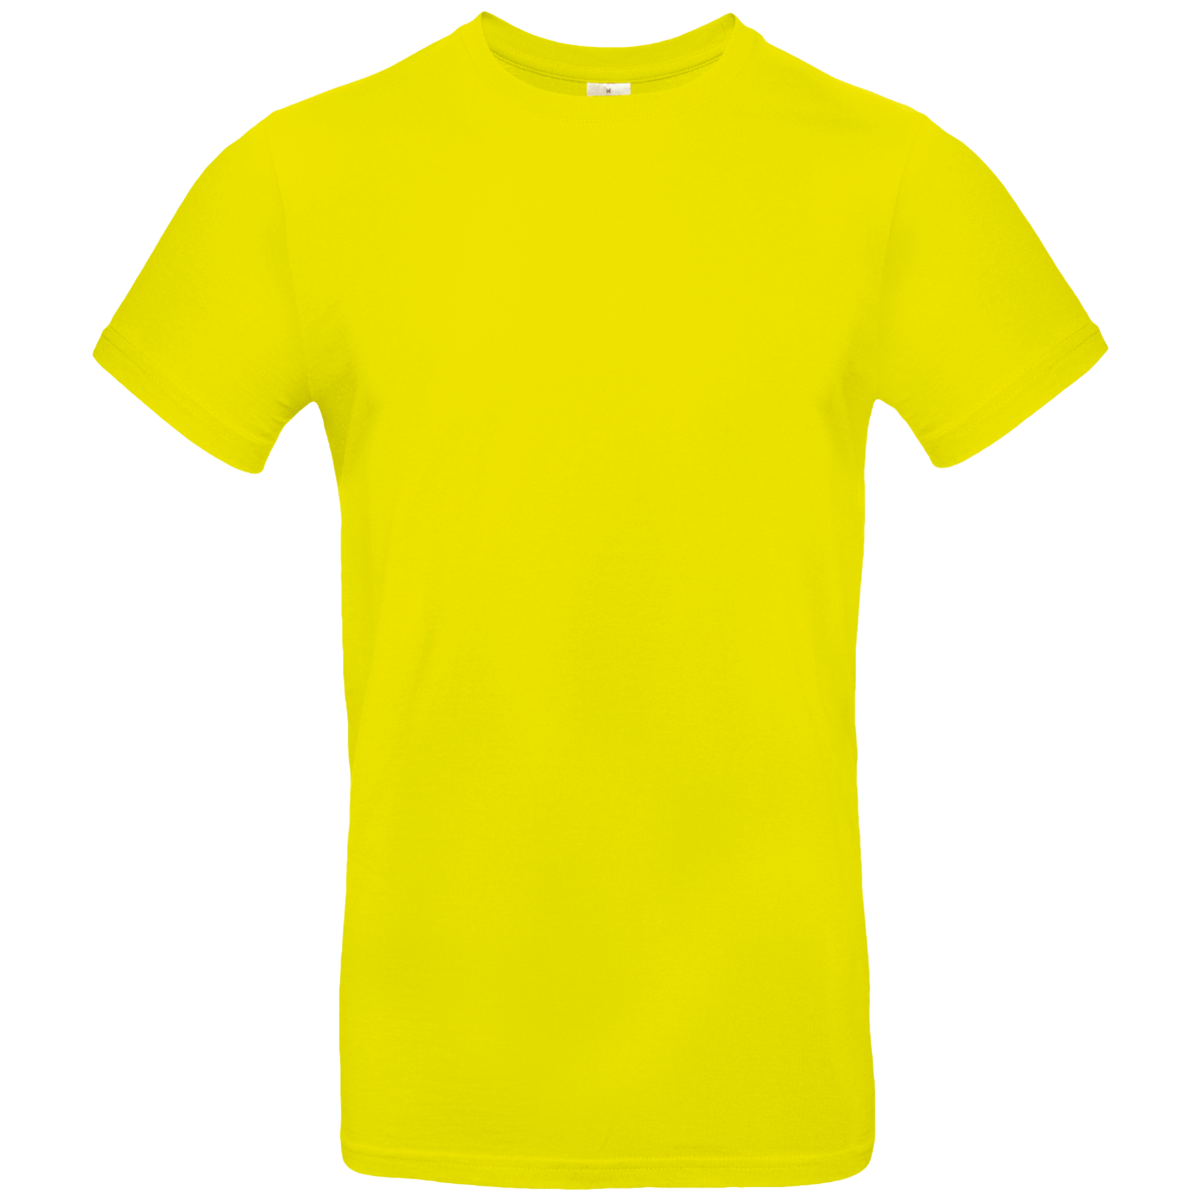 Tee-Shirt Homme Personnalisable Sur Tunetoo Pixel Lime